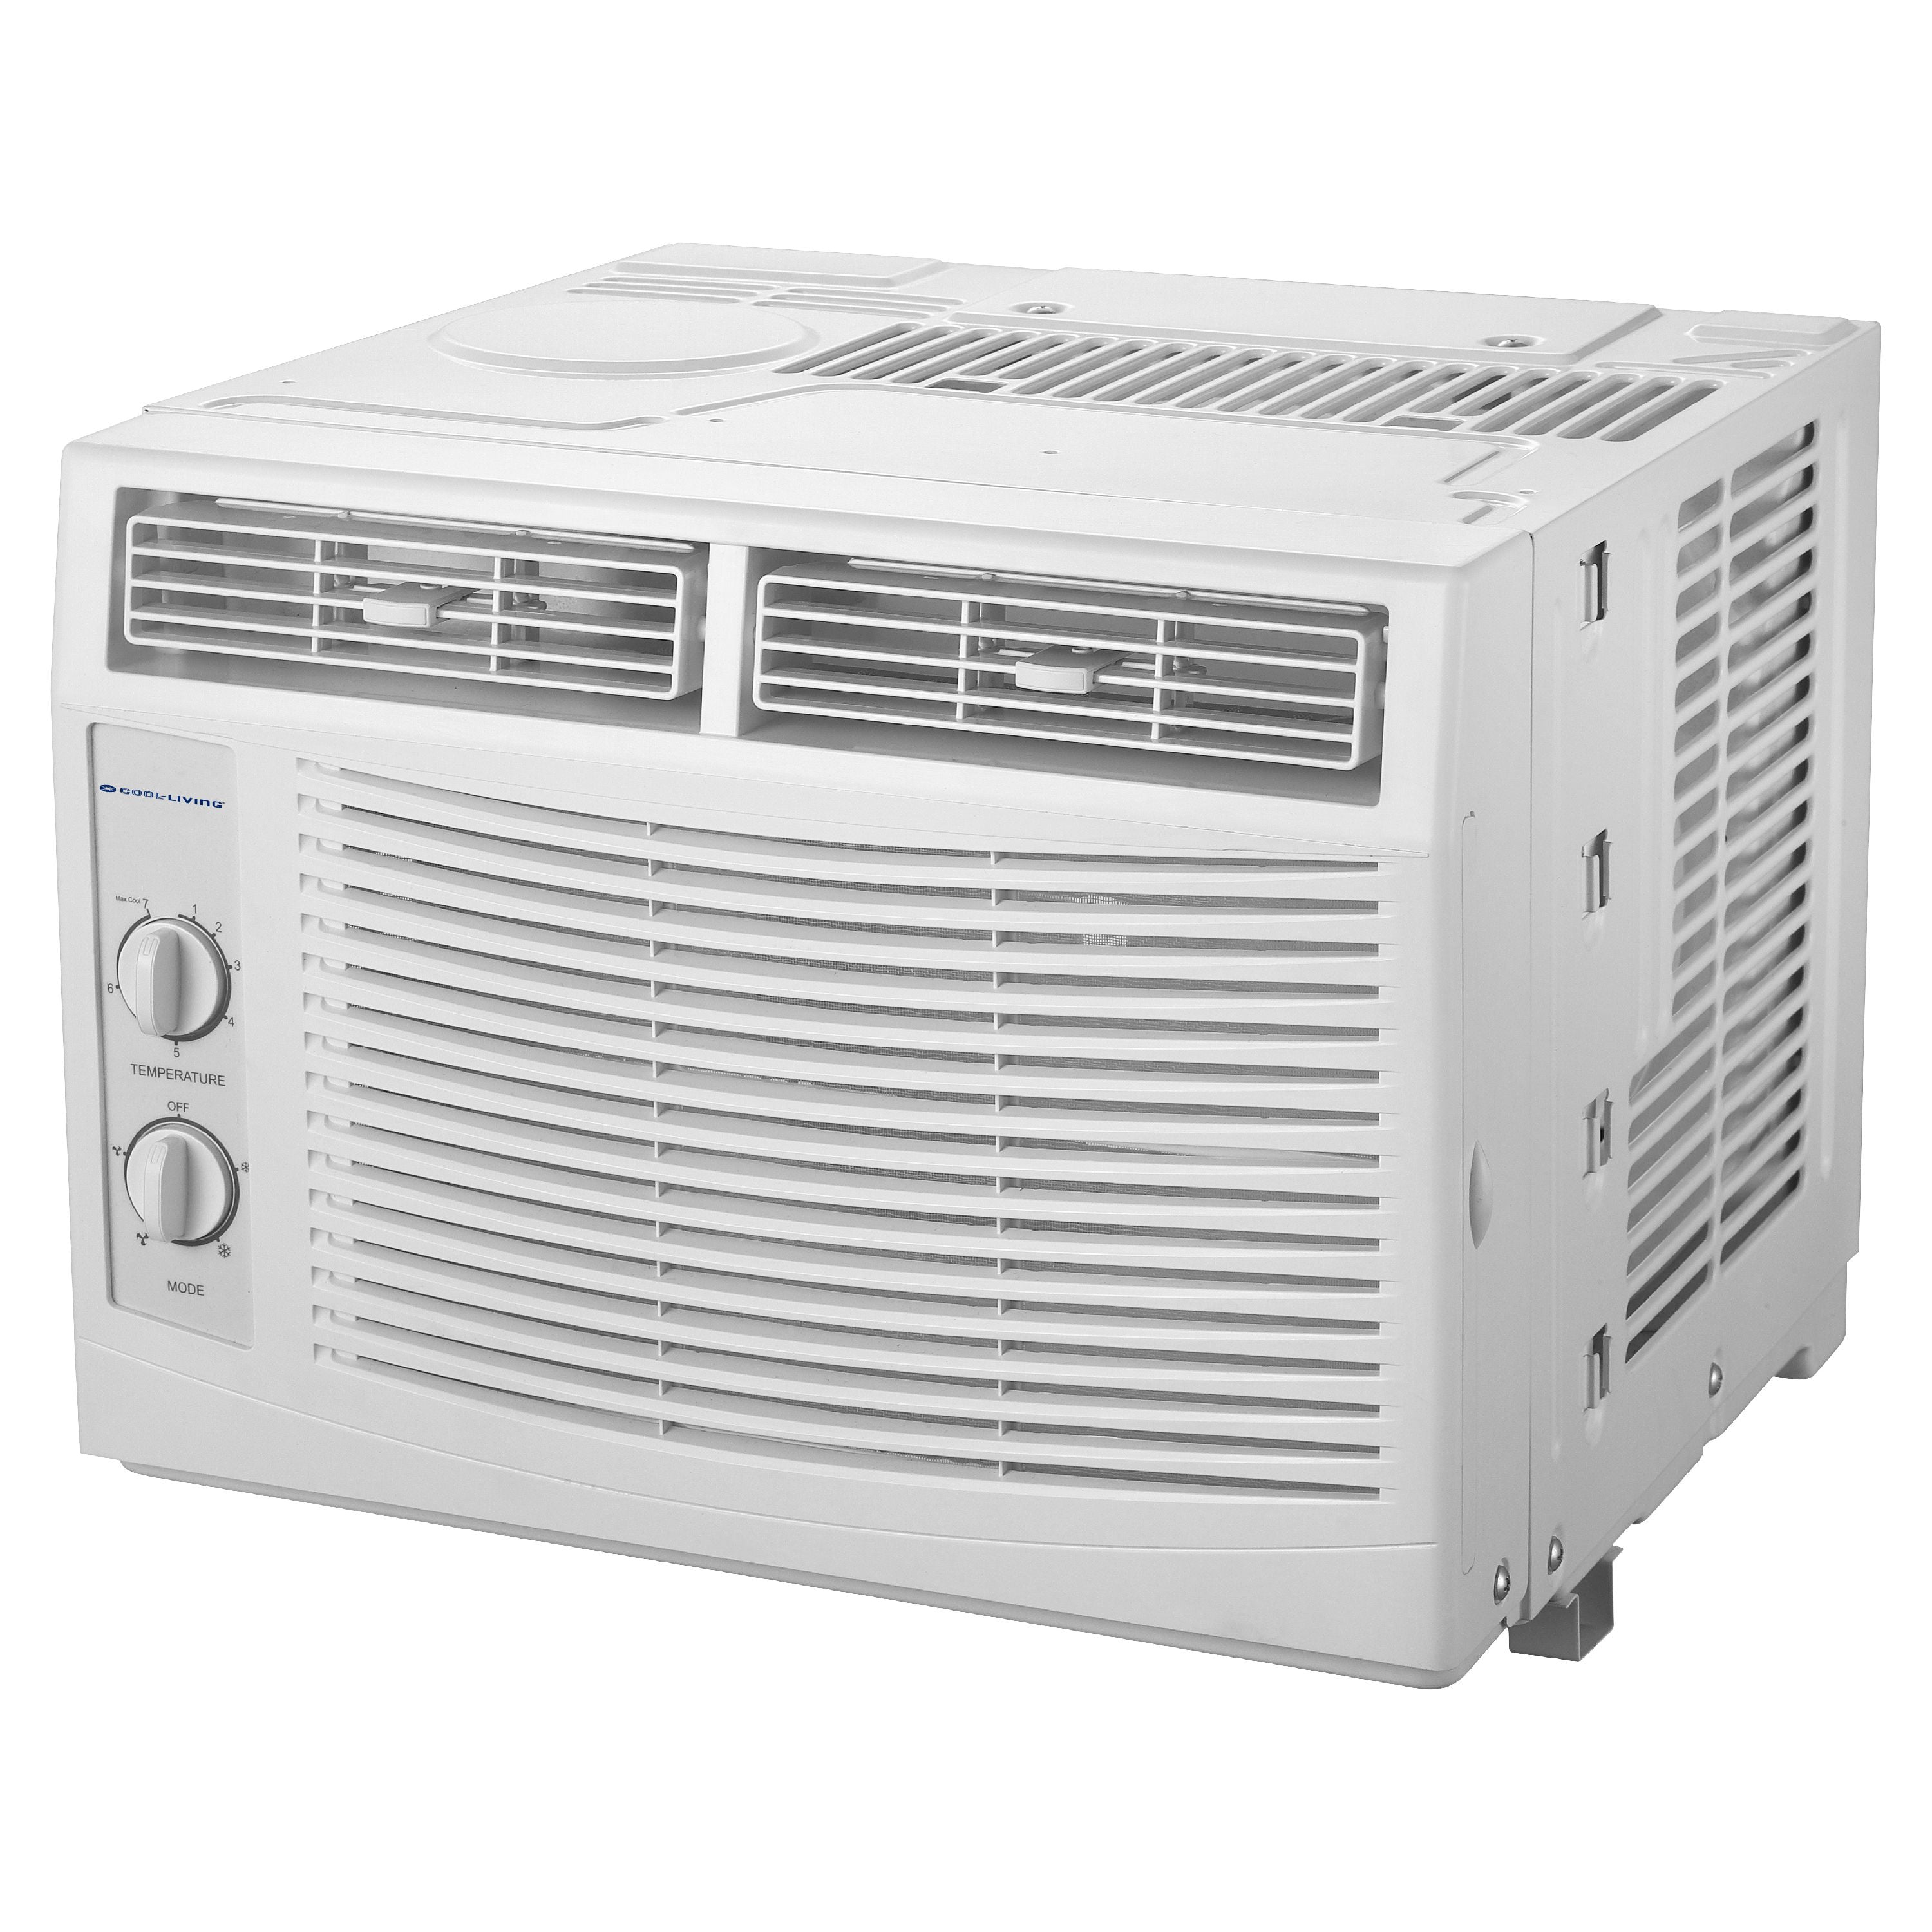 Cool Living 5 000 BTU Window Air Conditioner 115V With Window Kit